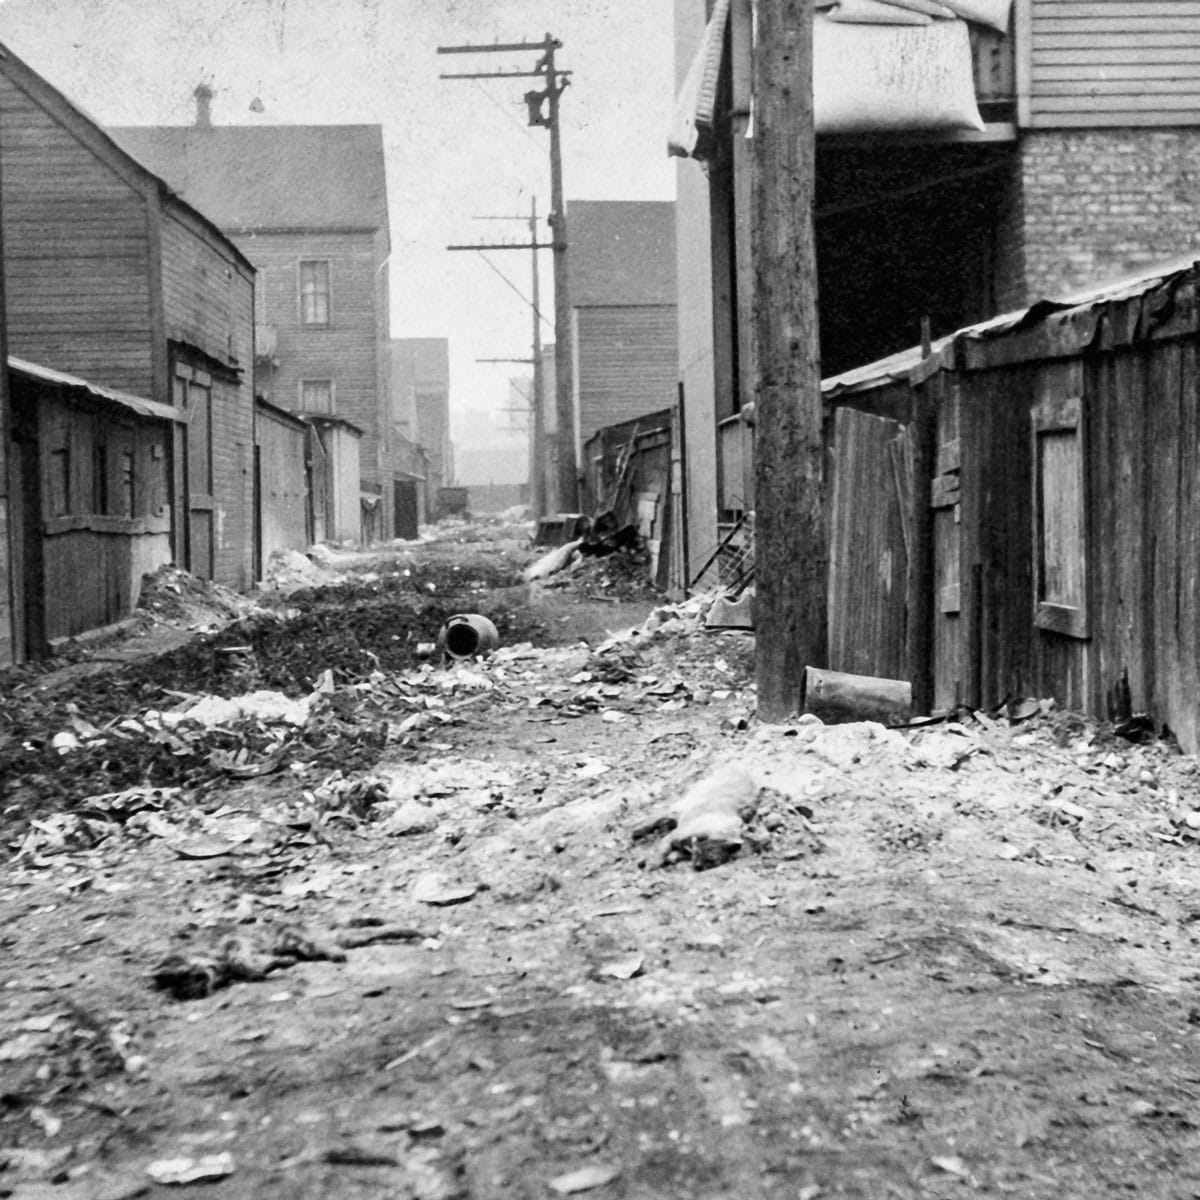 Vintage photo of an alley between buildings with trash and mud strewn about